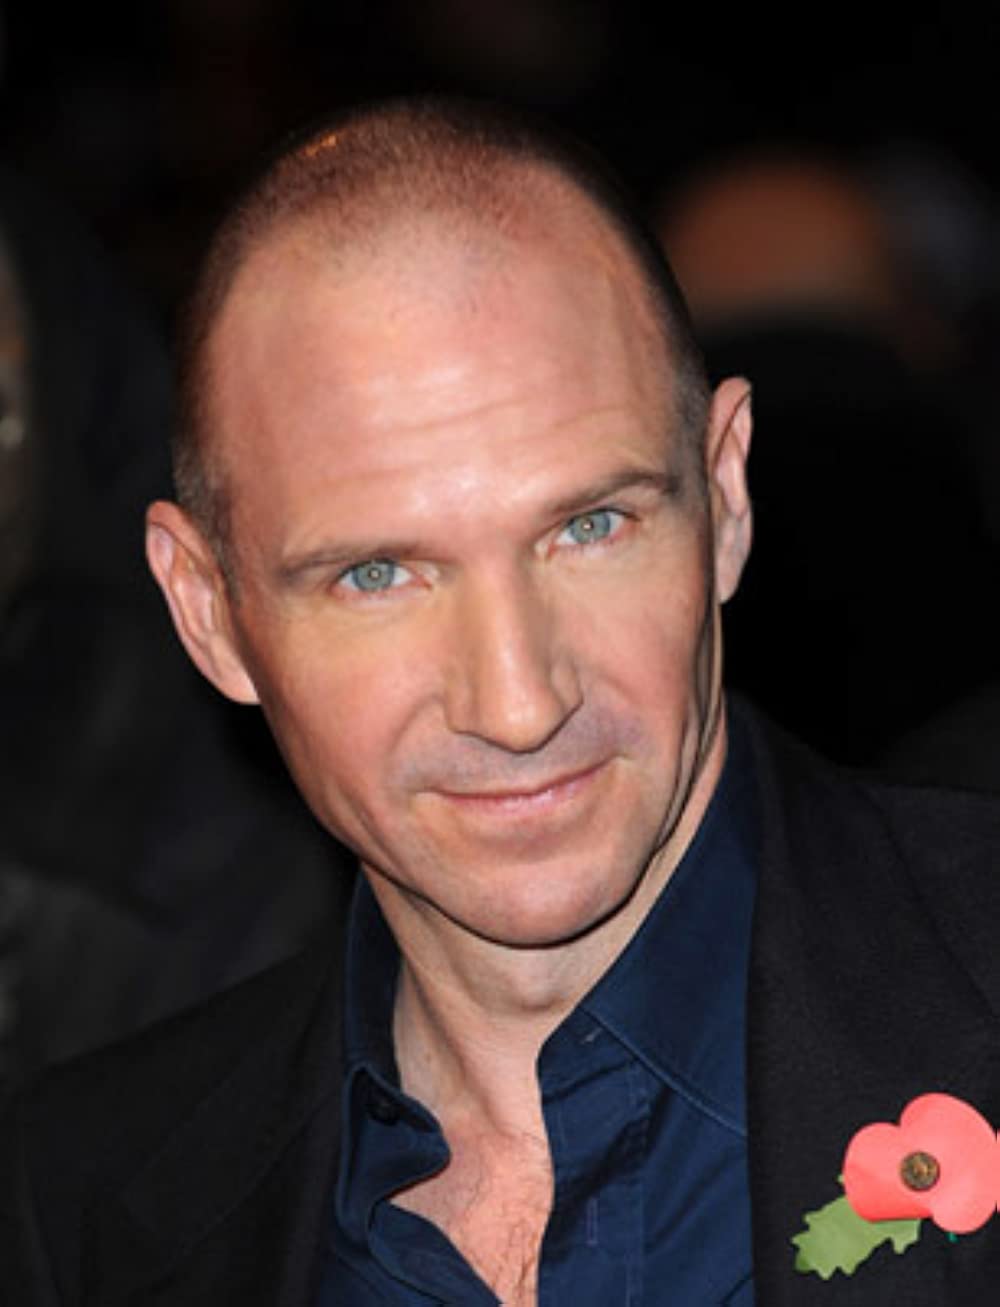 Who portrayed Lord Voldemort in the Harry Potter series? 2